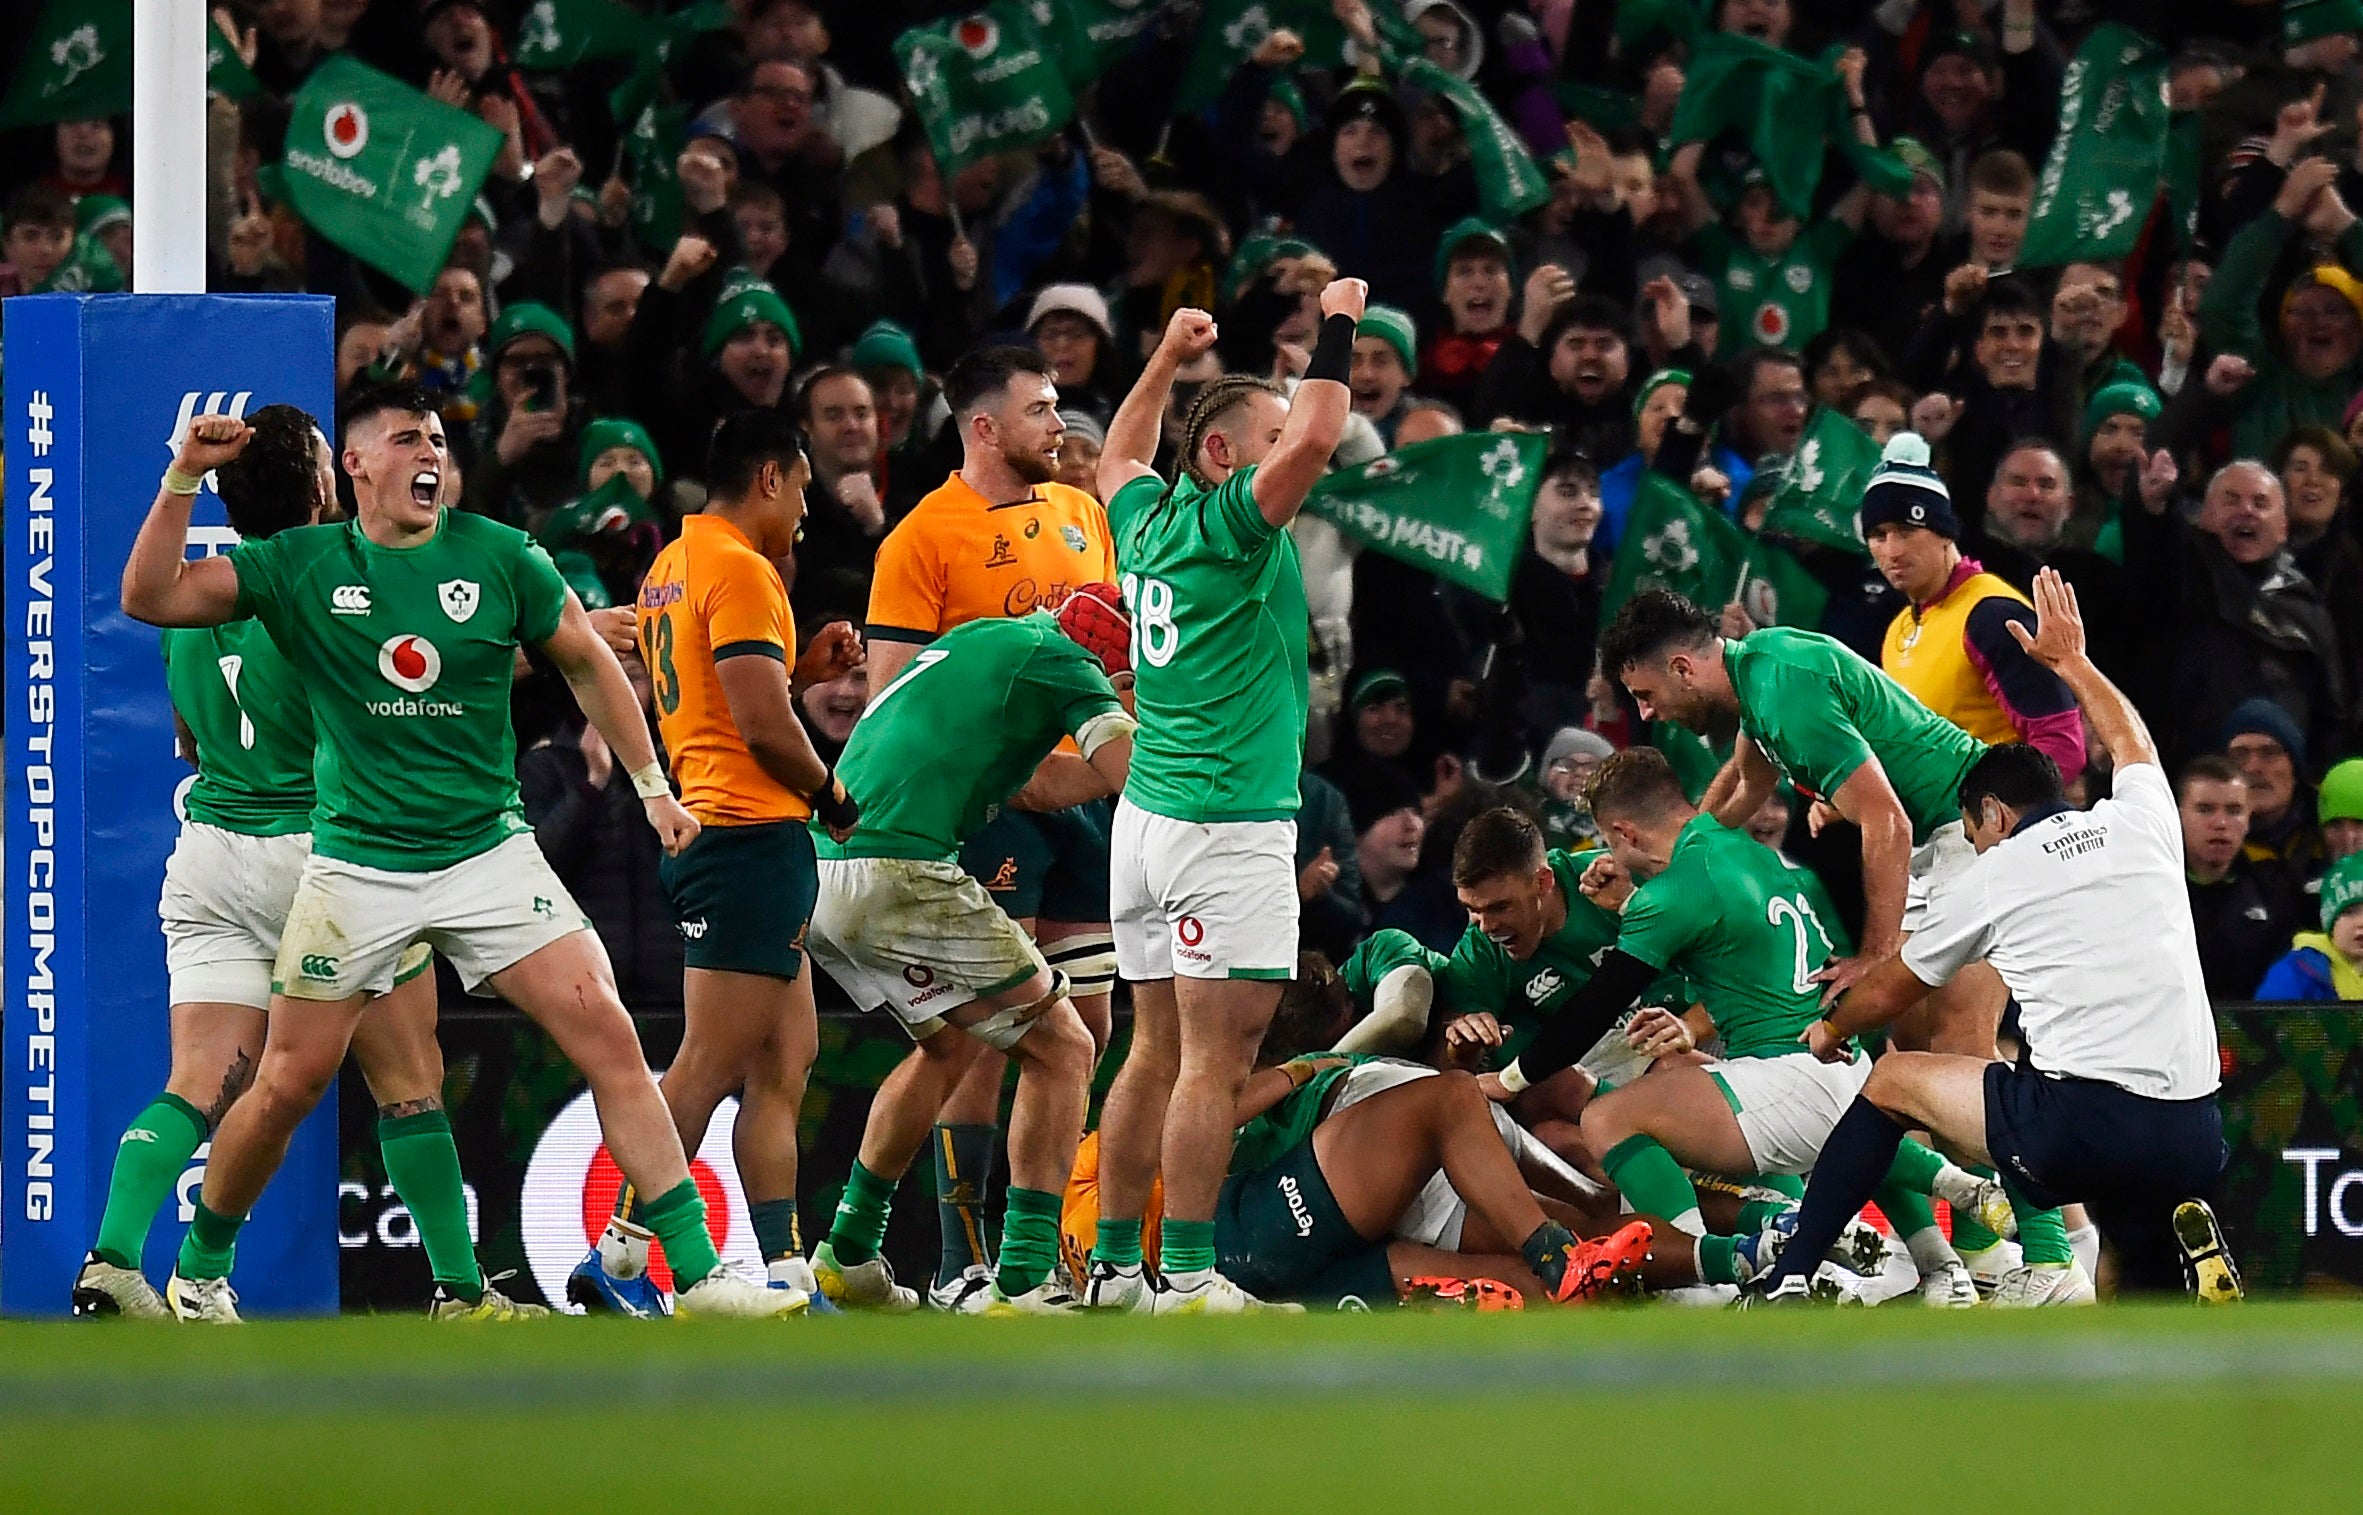 Ireland capped a famous late win